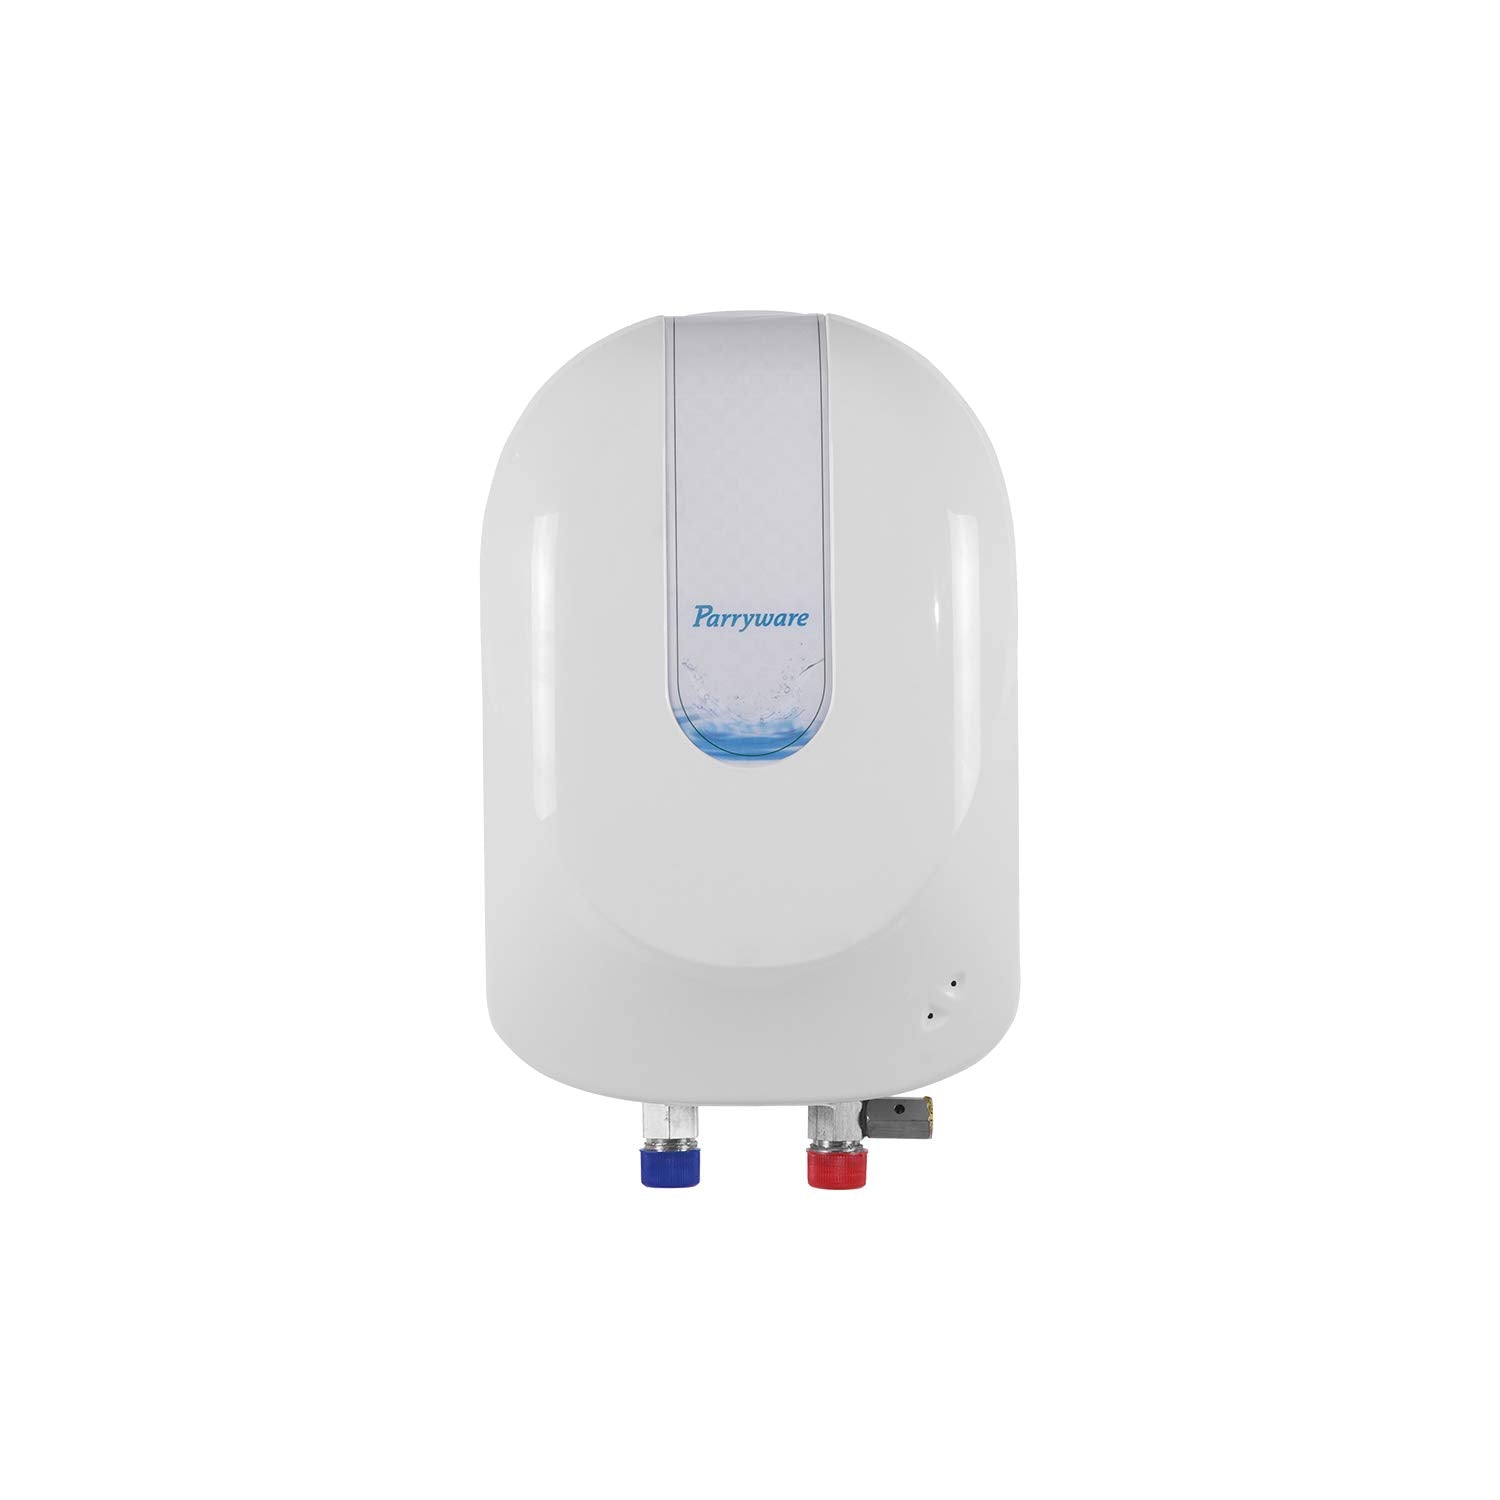 Parryware 3.0 KW Geyser 3 L with Automatic Temperature Control (White)